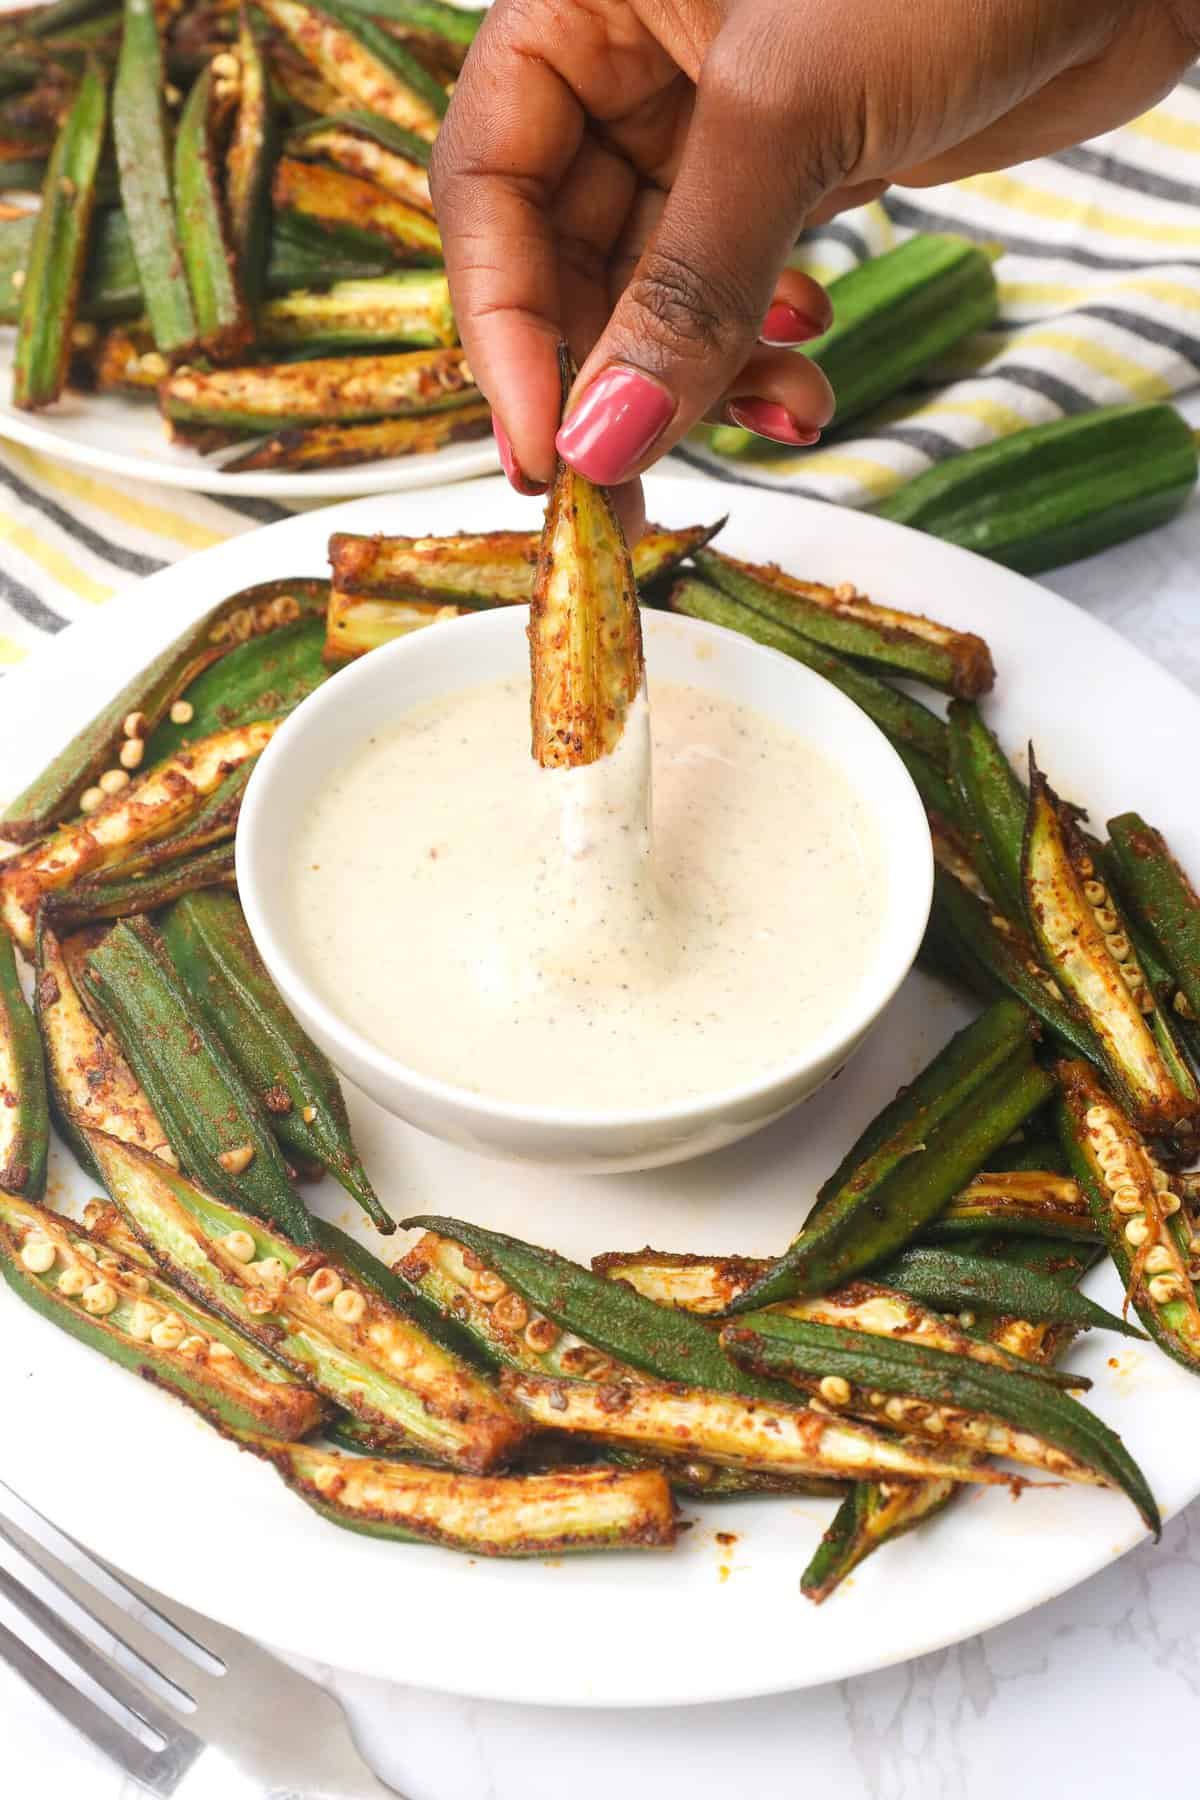 Dipping whole oven roasted okra in mayo sauce